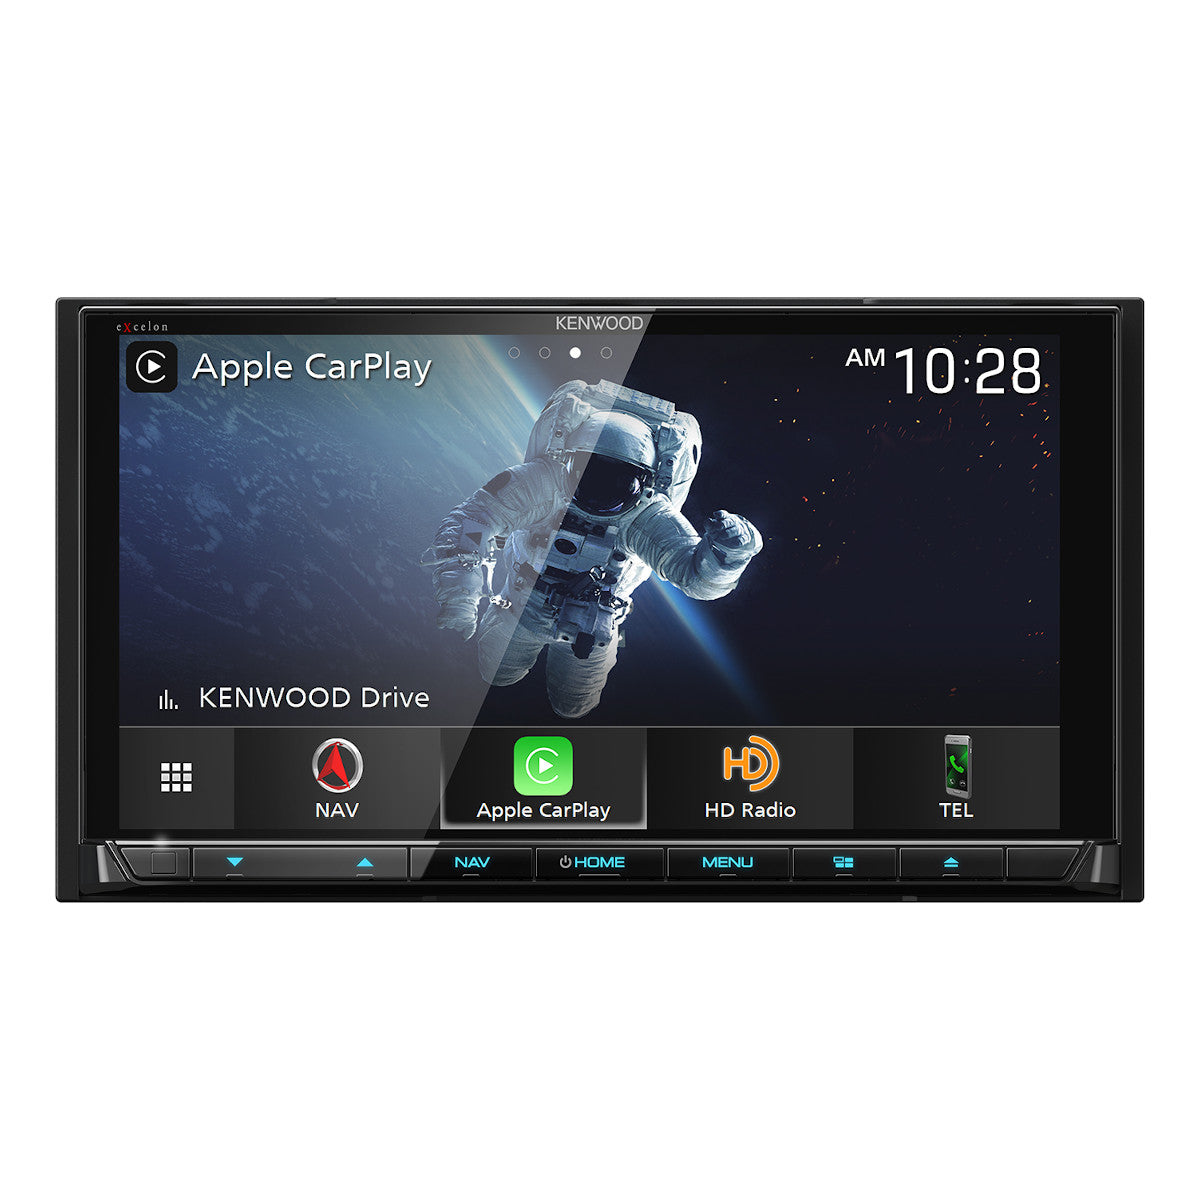 Kenwood DNX997XR 6.8" CD/DVD Garmin Navigation Touchscreen Receiver w/ Apple CarPlay and Android Auto